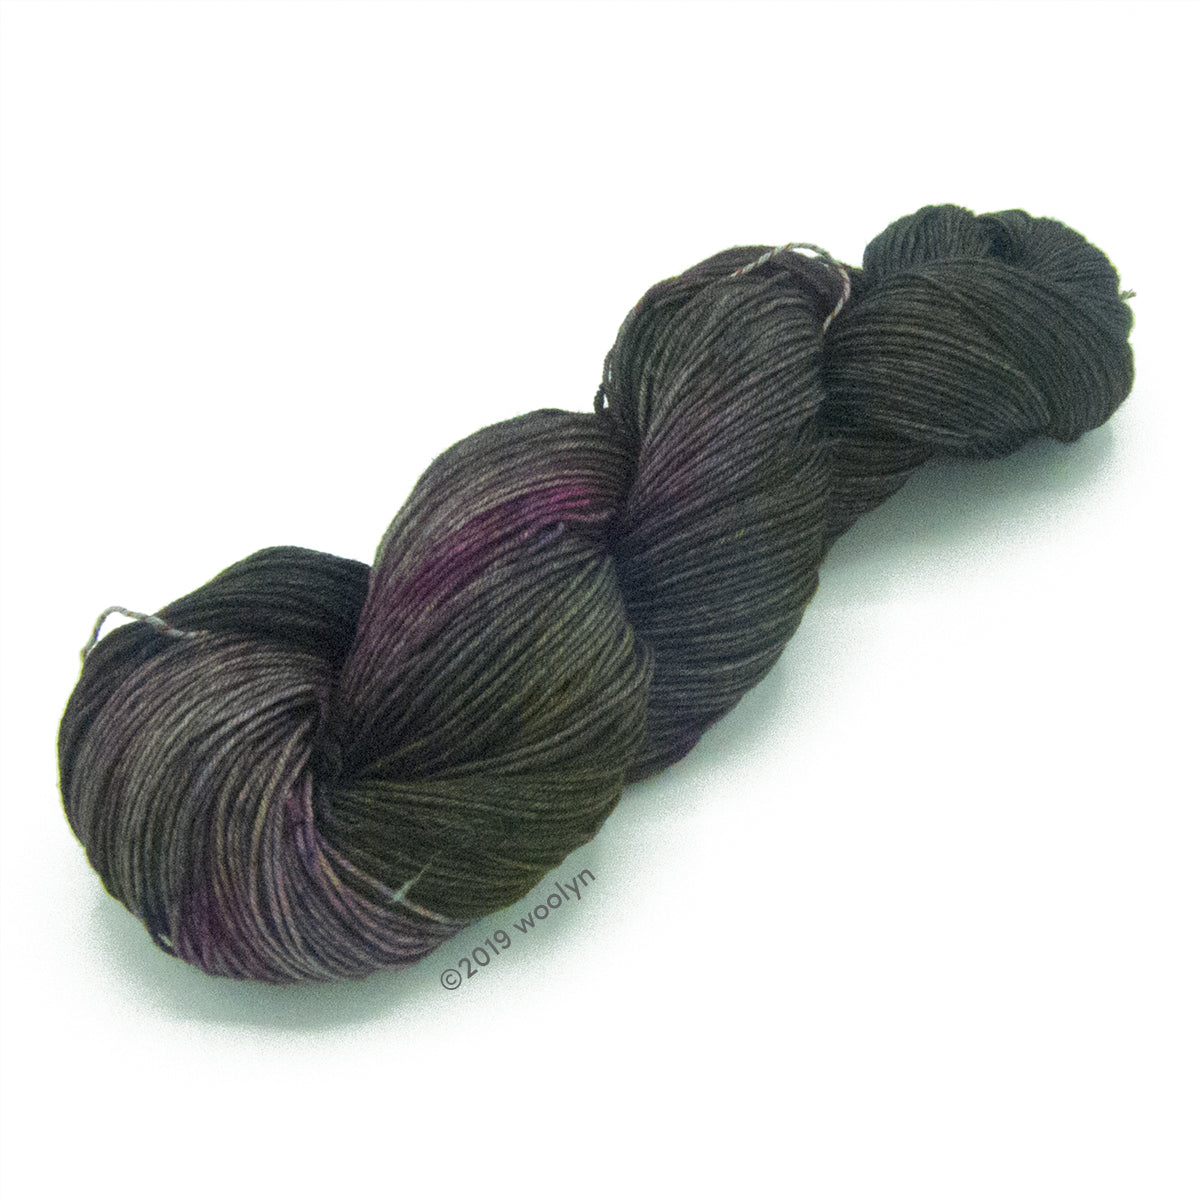 Molly Girl Bouncer in exclusive shop colorway No Sleep 'Til Brooklyn a grey black with a hint of maroon. This yarn glows under a black light. 